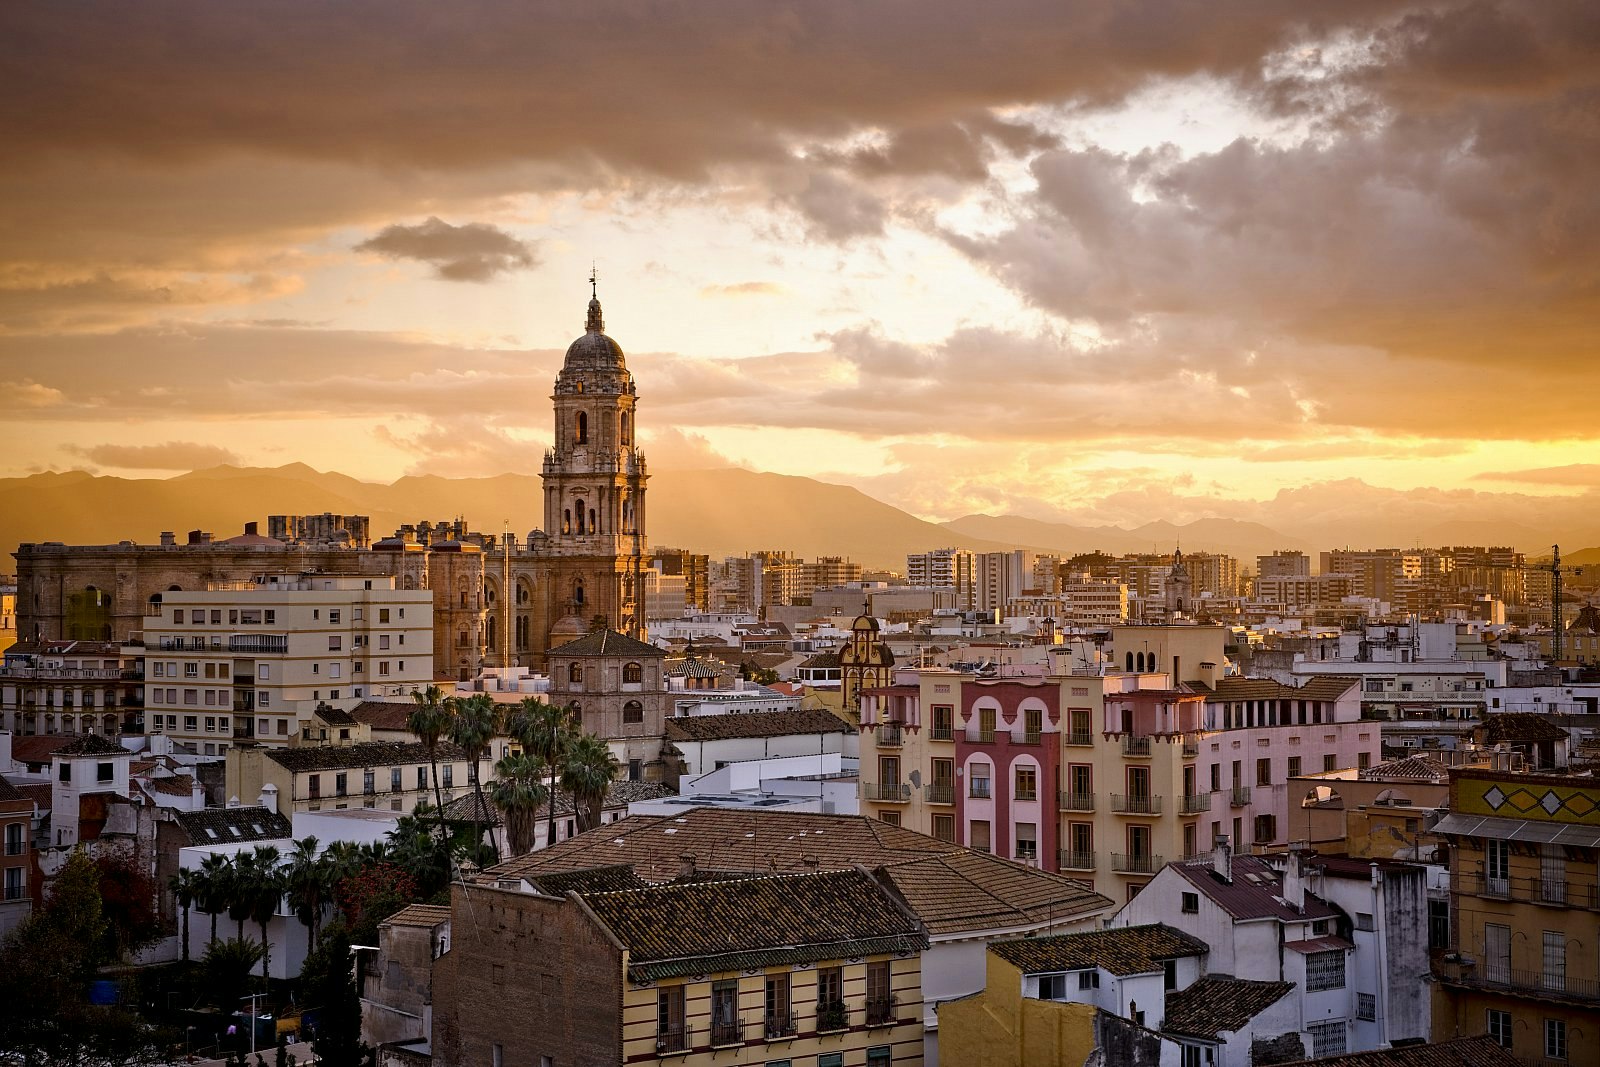 A dramatic sunset over the Malaga skyline, which has a mixture of modern and historic buildings and a church spire at its centre. 